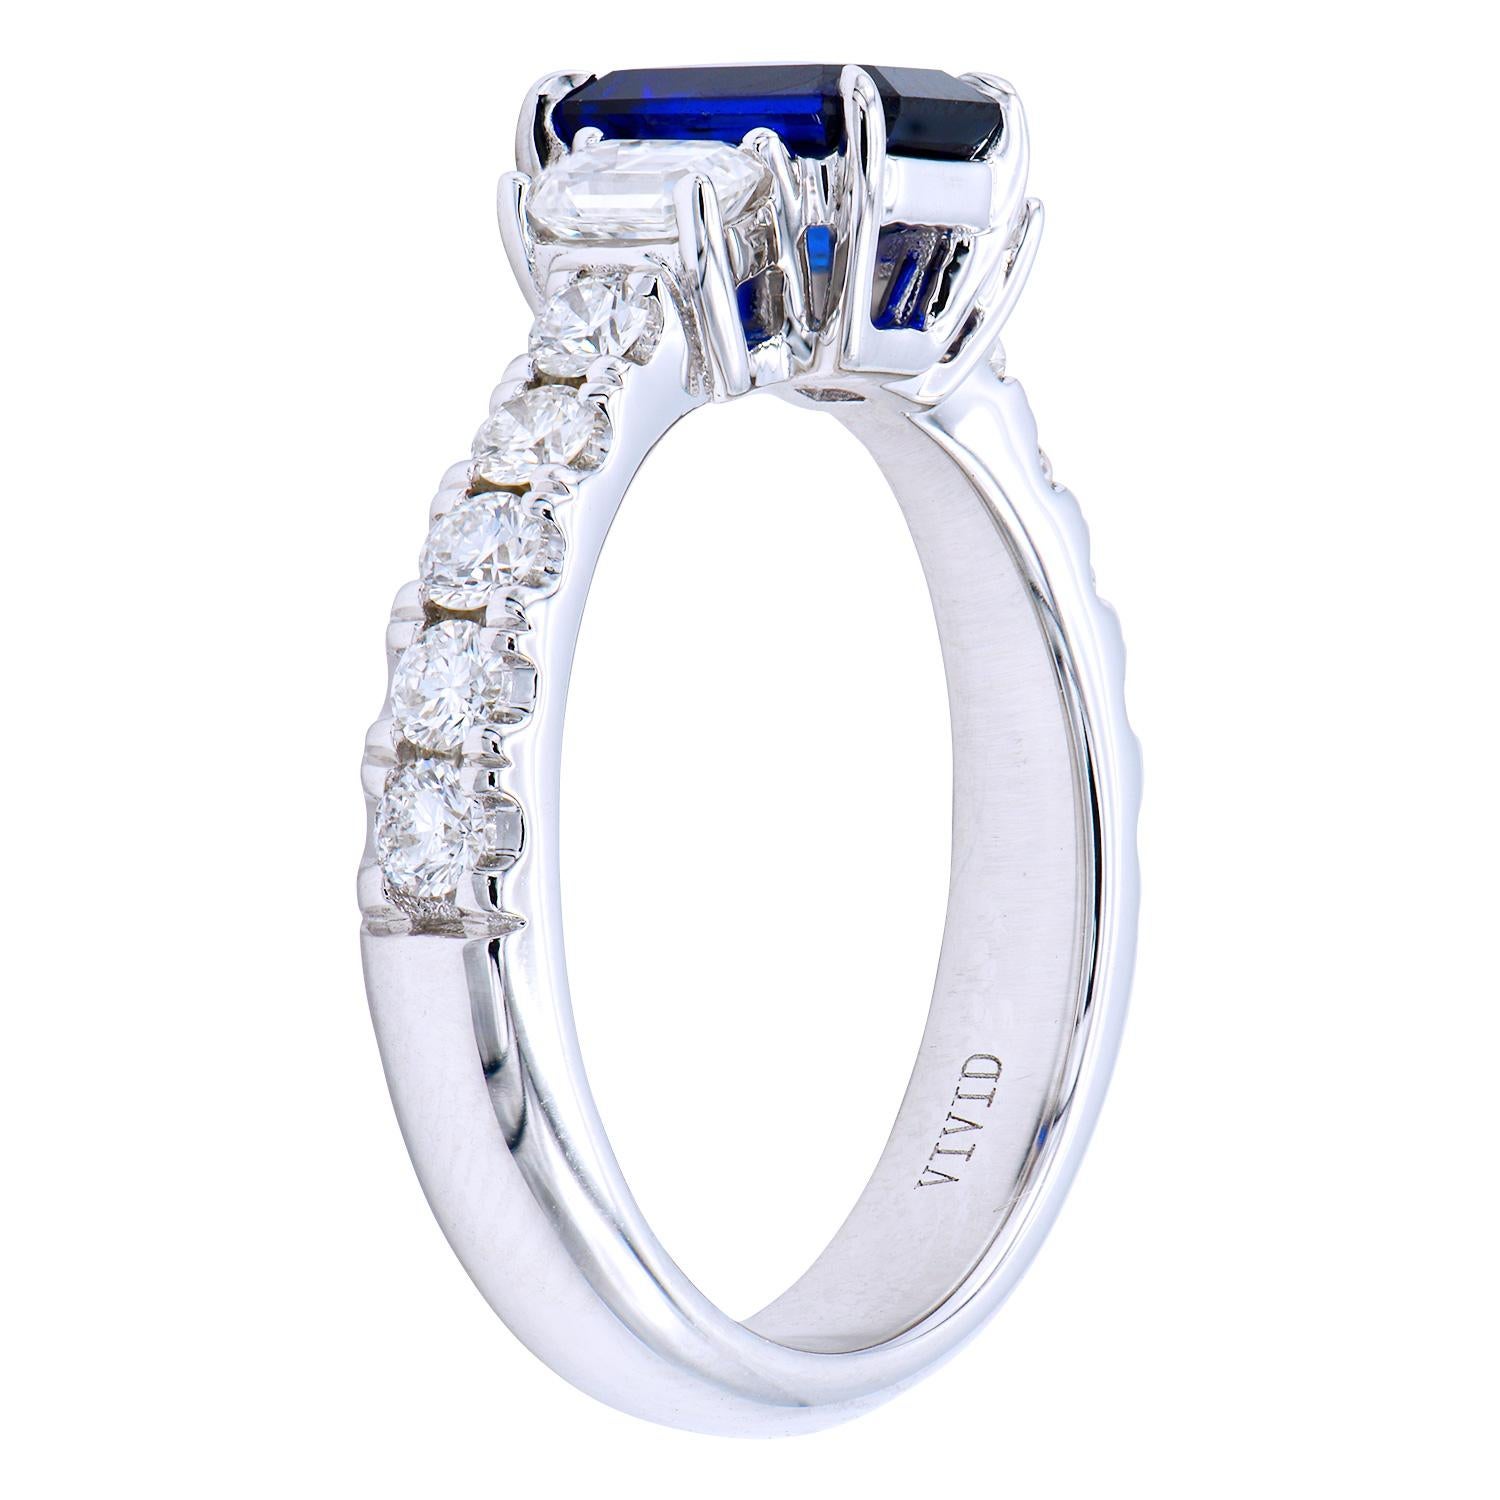 This stunning 1.45 carat Ceylon, Emerald cut, Blue Sapphire is set with 2 Emerald cut diamonds on either side totalling 0.44 carats and then with round diamonds set into the band totaling 0.48 carats. The diamonds are VS2, G color. The ring is made